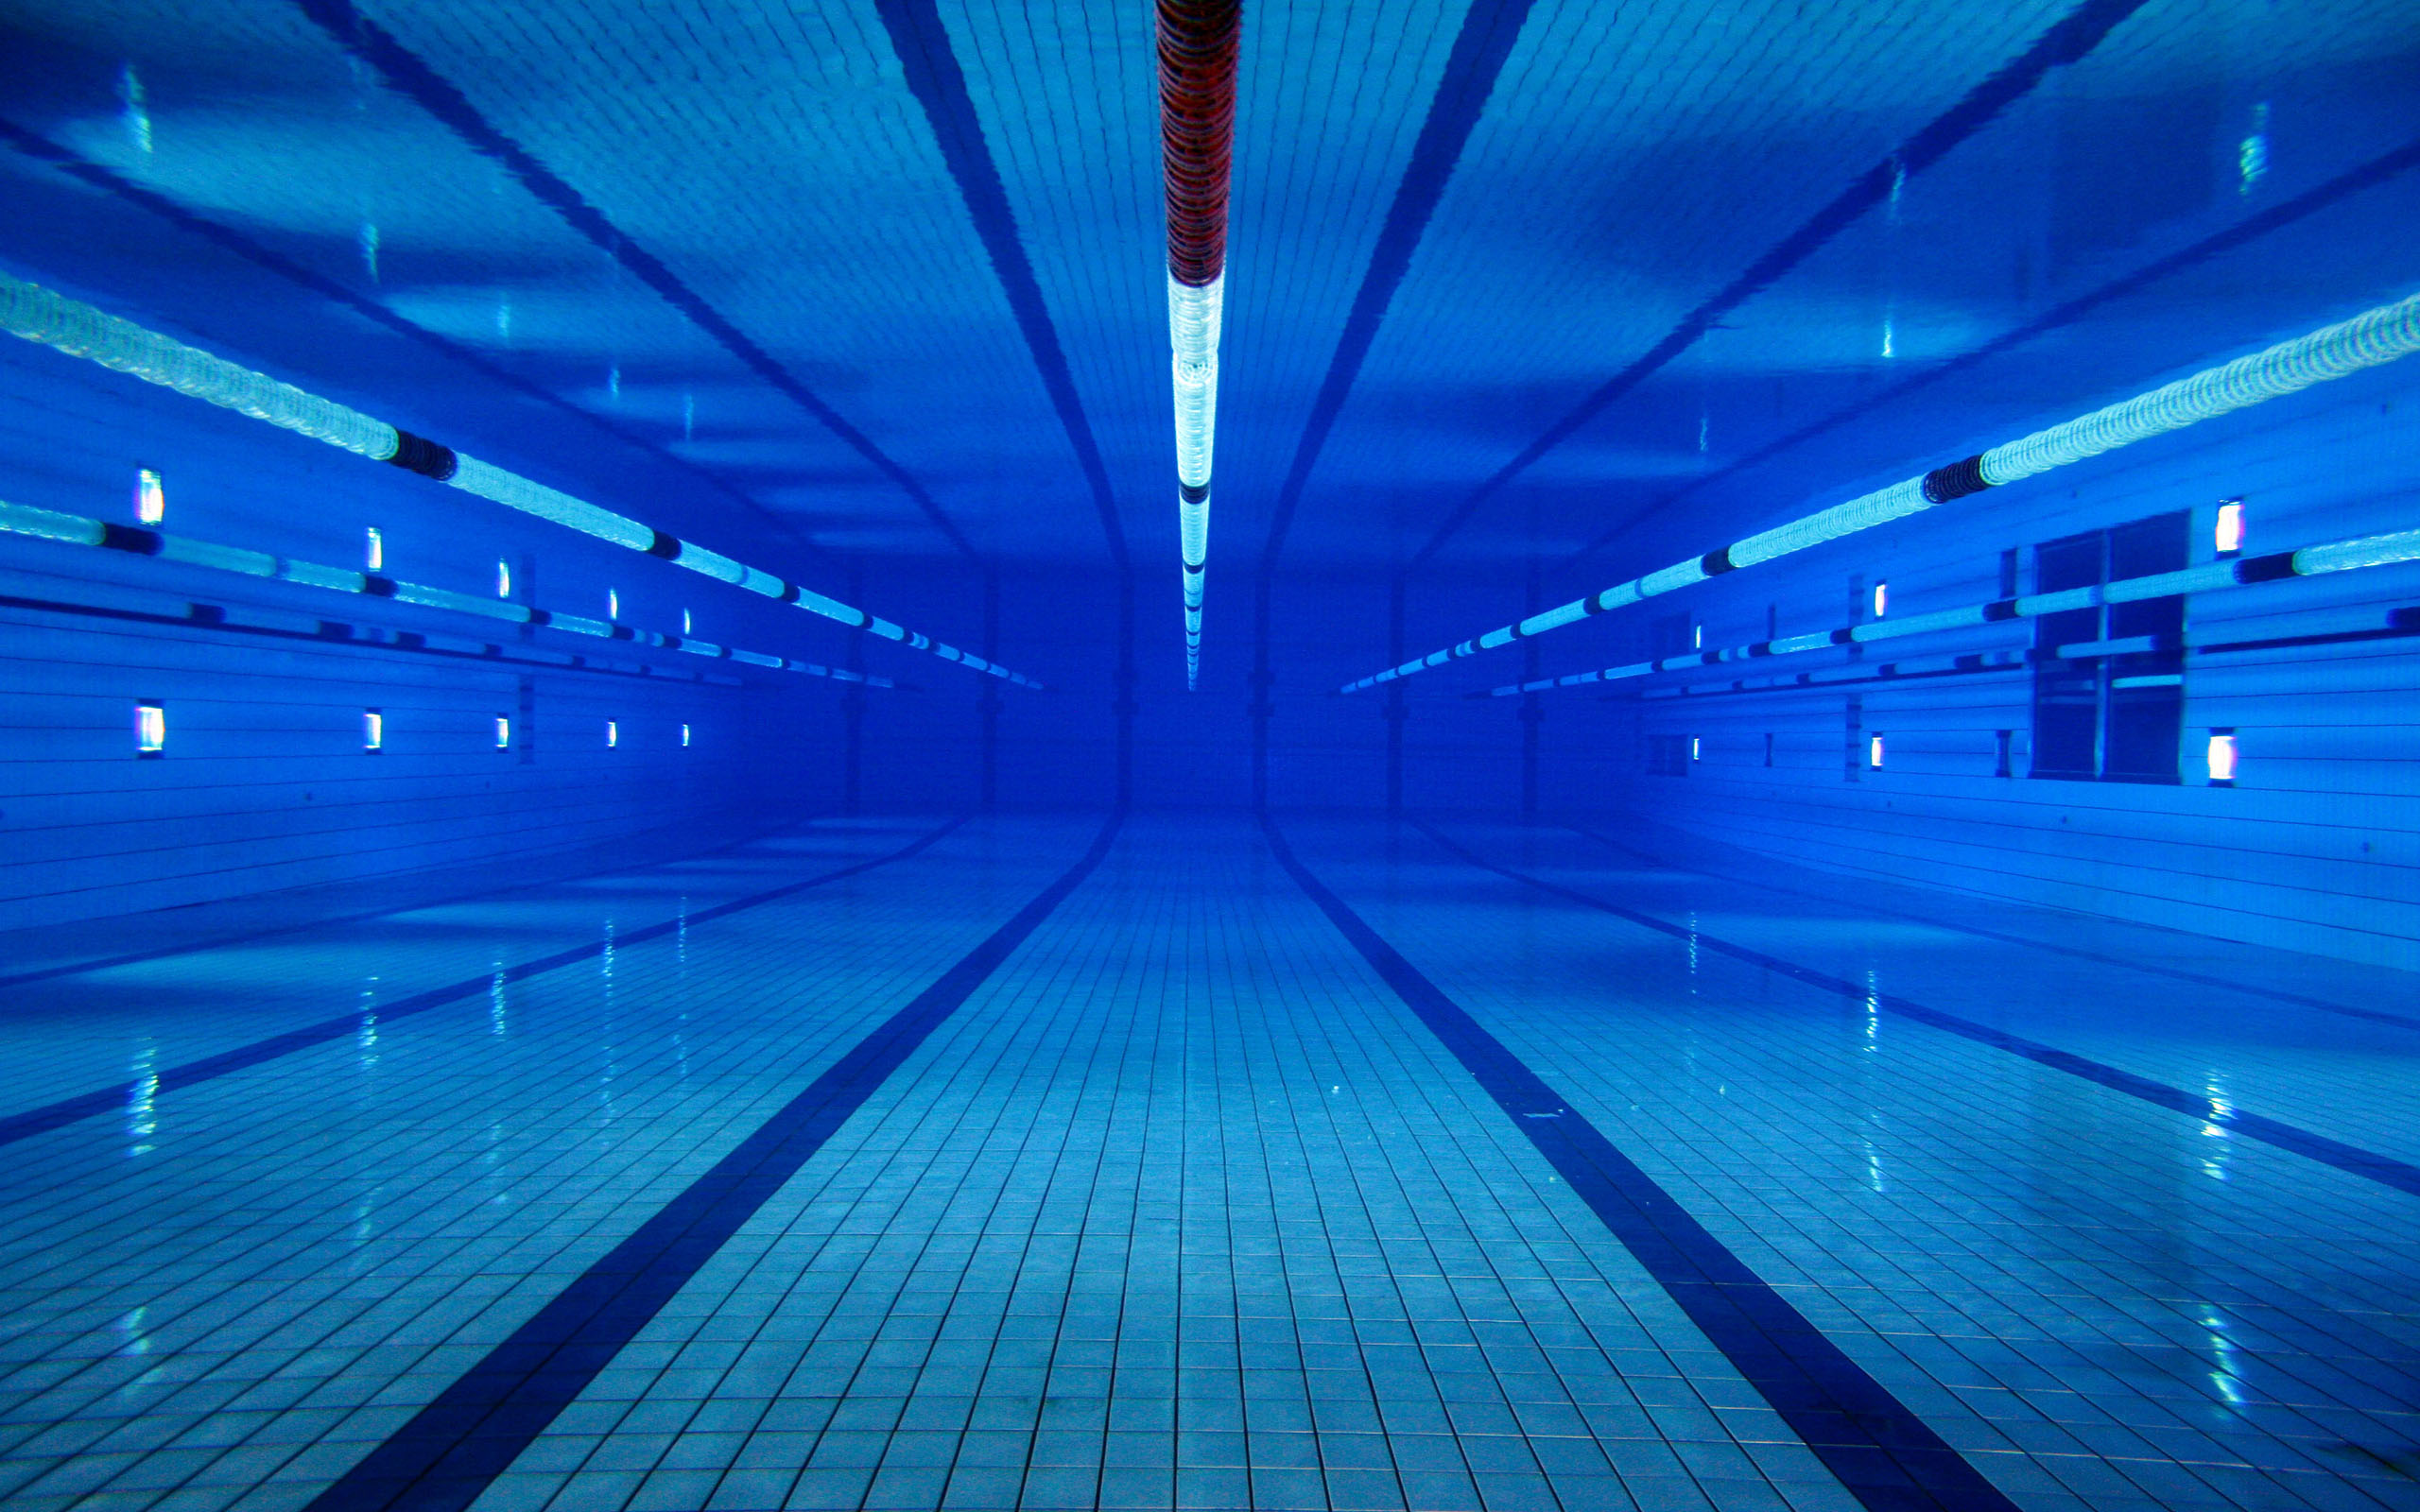 Swimming Wall Paper Wallpapers